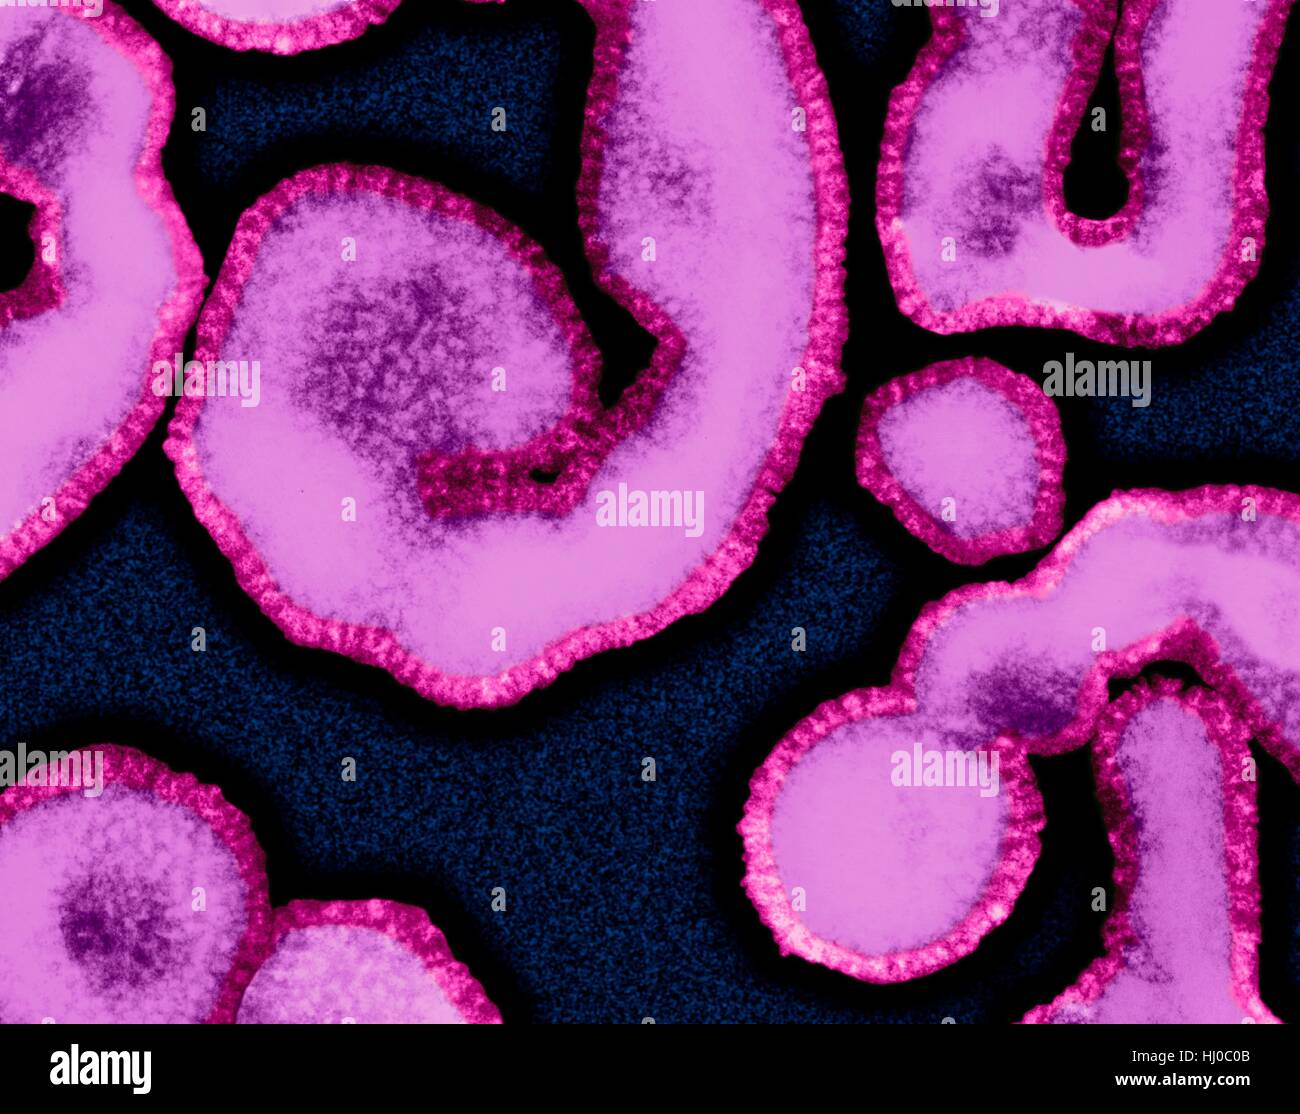 Influenza virus (RNA virus,Orthomyxoviridae Family),coloured transmission electron micrograph (TEM).'Influenza Virus',often know as 'The Flu Virus' often changes or mutates,complicating development of suitable vaccines for all strains.As result,epidemics or even occasional pandemics of influenza Stock Photo